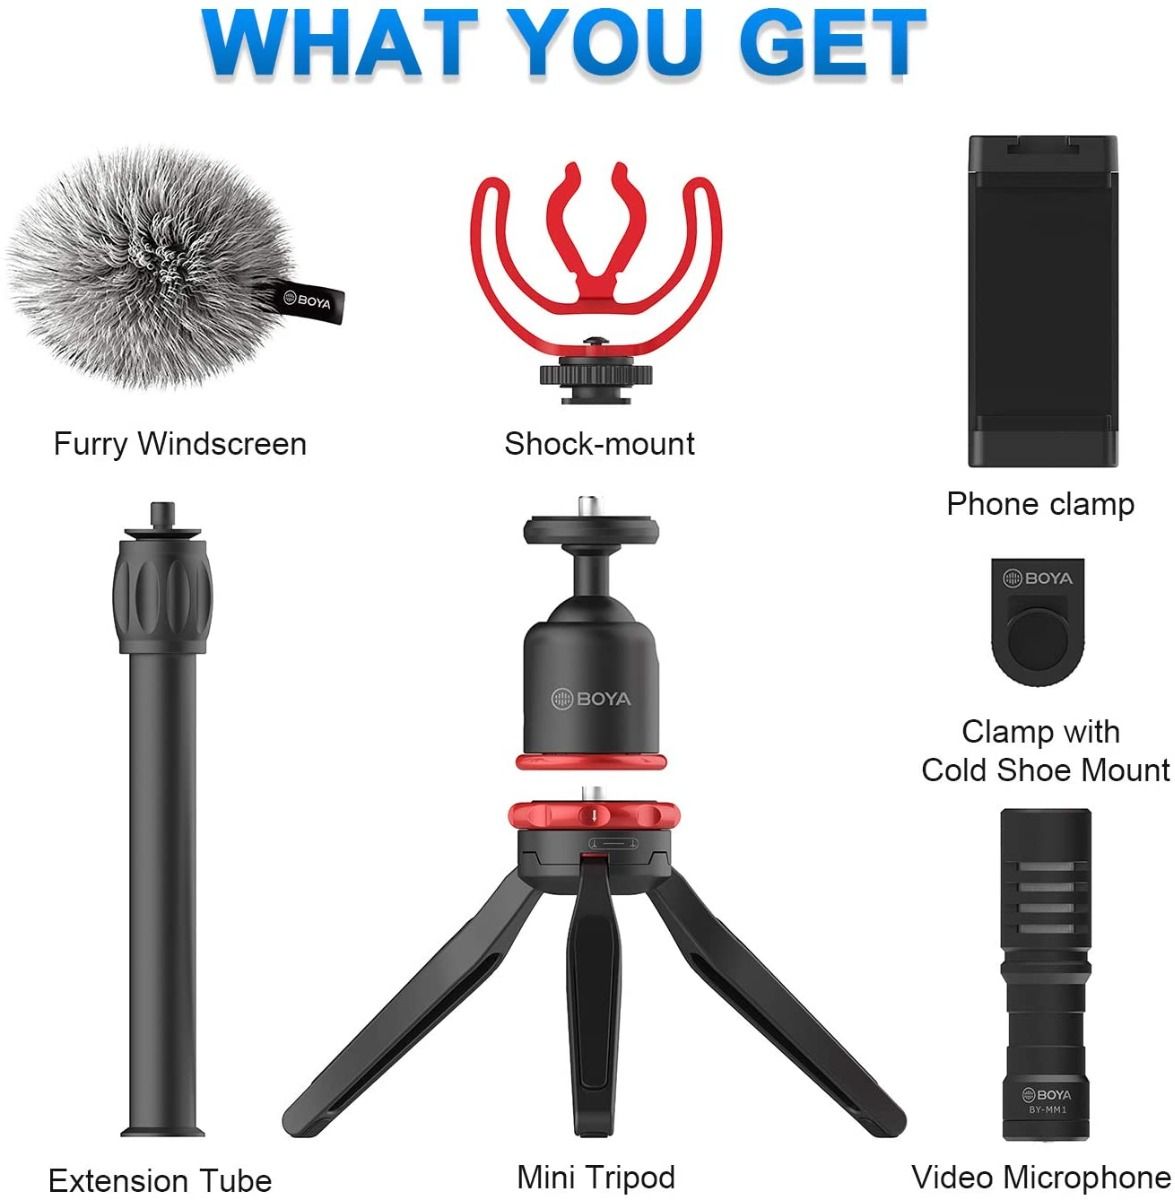 Boya BY-VG330 Vlogging kit 1 with Mini Tripod, extension tube, and Video Microphone